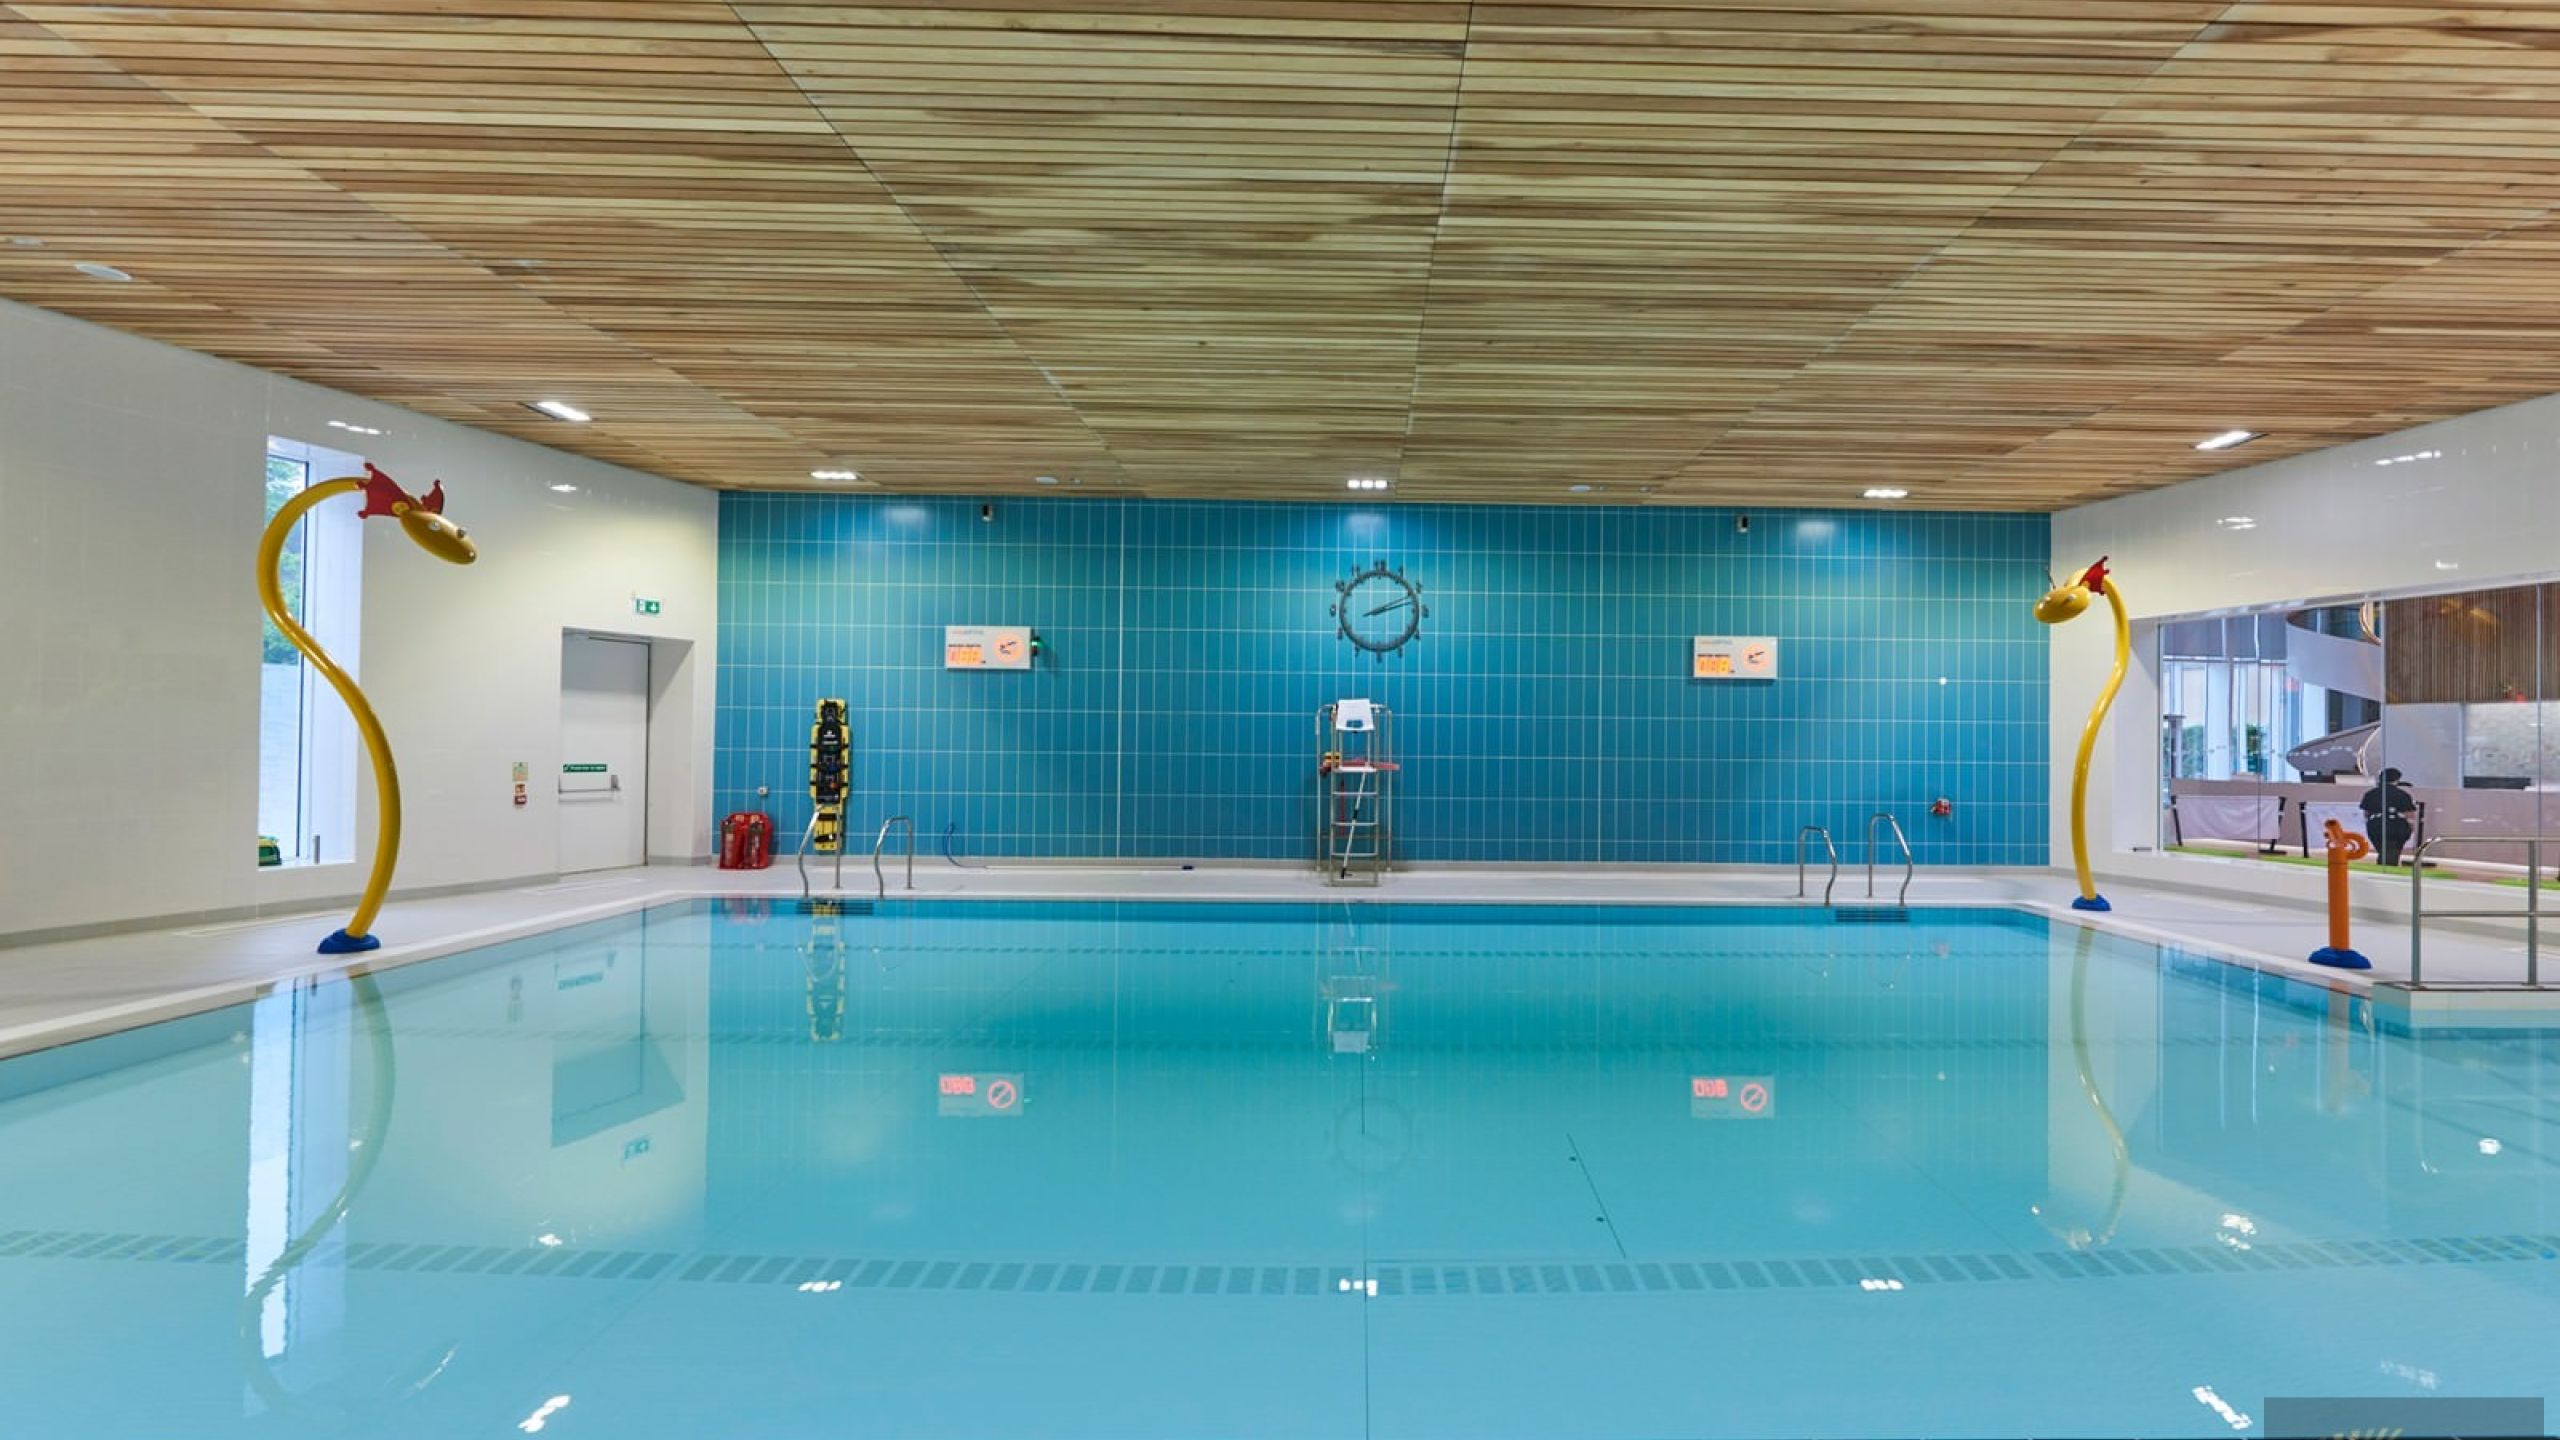 BCL Timber Slatted Ceilings at Irvine Leisure Centre